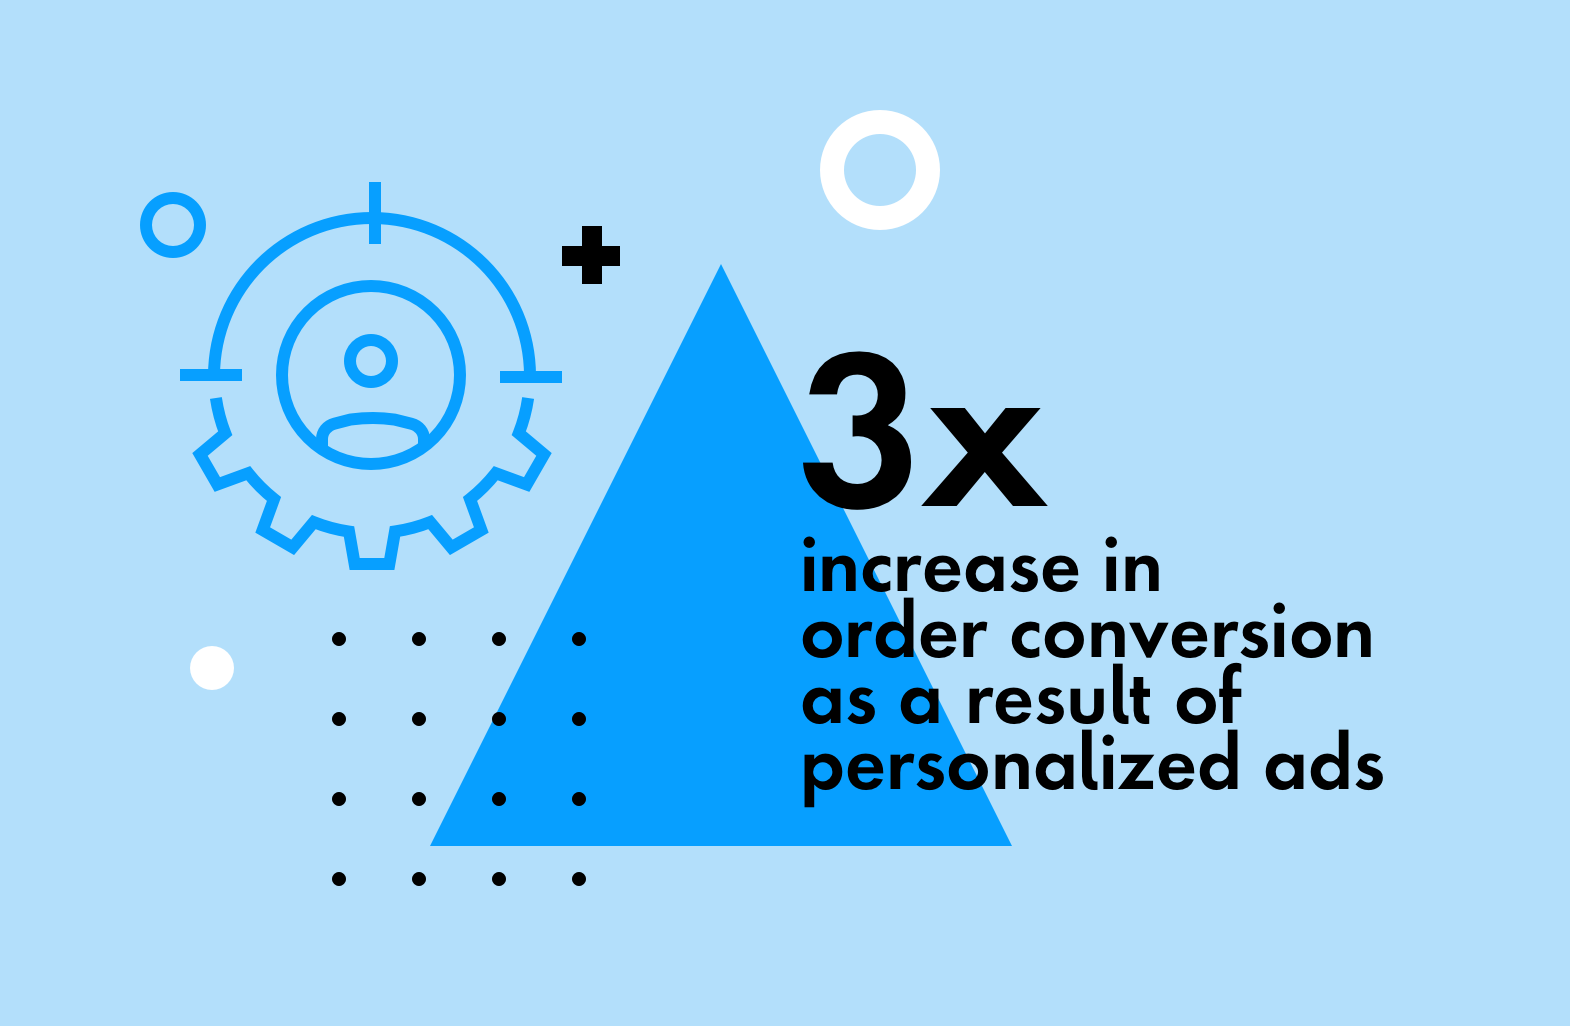 3X increase in order conversion as a result of personalized ads